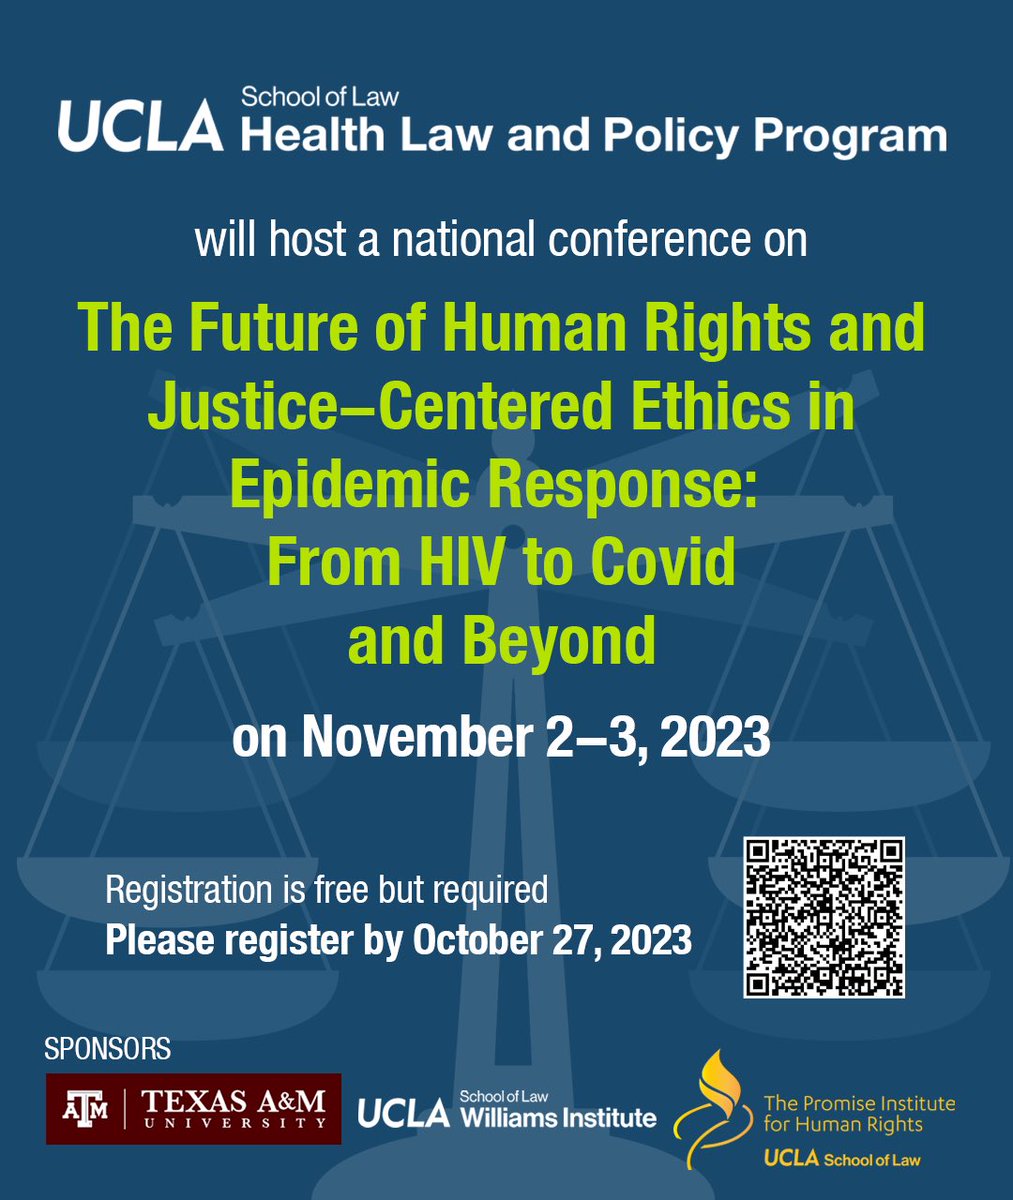 Register now for our Nov. 2-3 conference on Human Rights & Justice Centered Ethics in Epidemic Response. Cosponsored with @TAMUHealth, @TAMULawSchool, @WilliamsPolicy & @PromiseInstUCLA. In-person and live-stream options: law.ucla.edu/academics/cent…